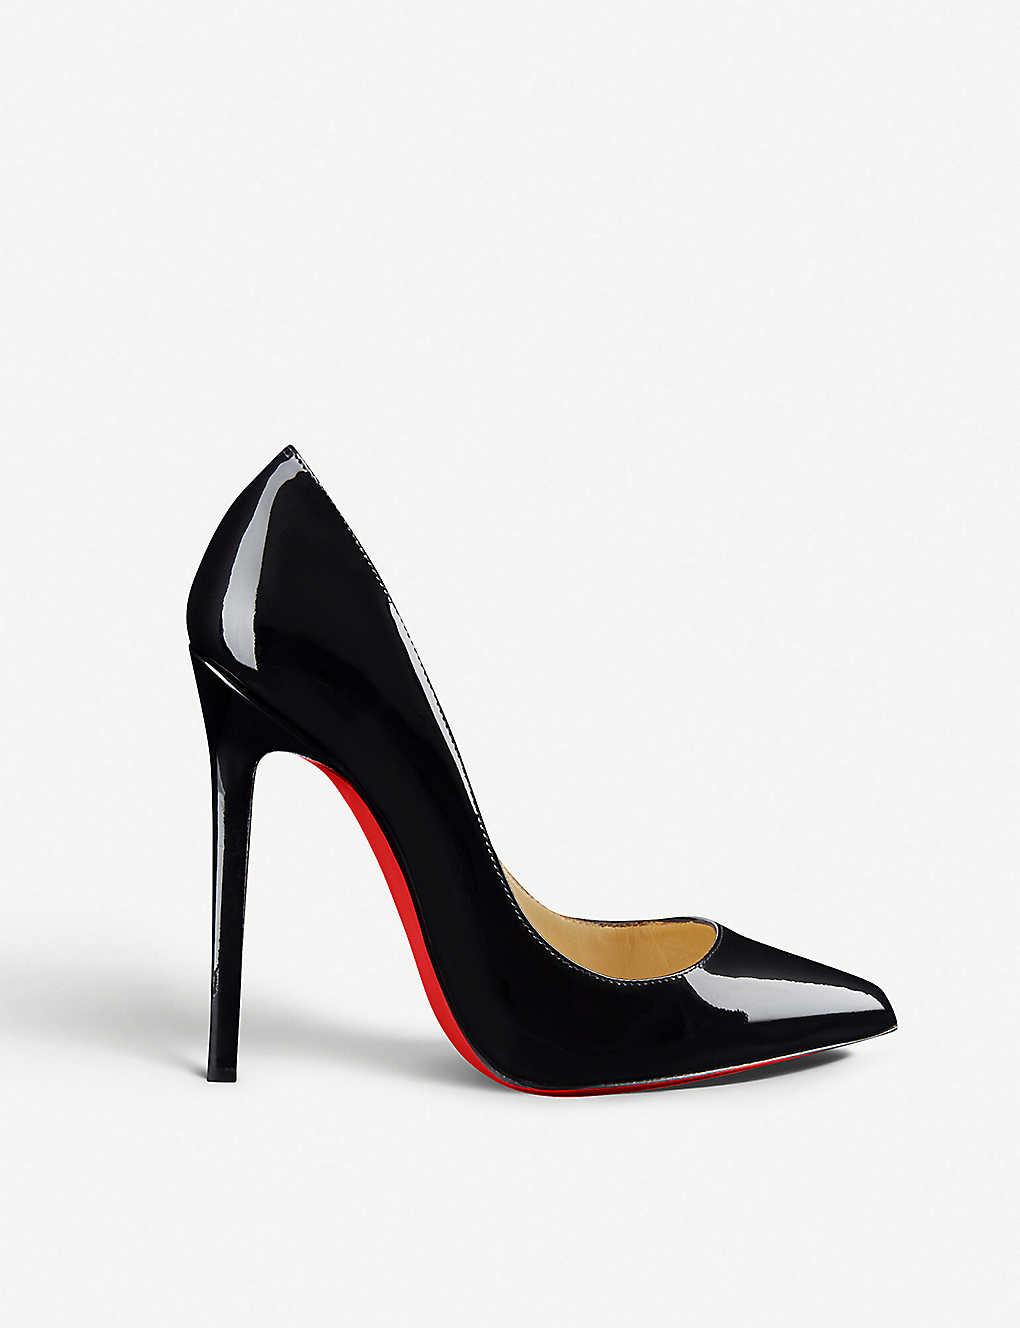 christian louboutin pigalle 120